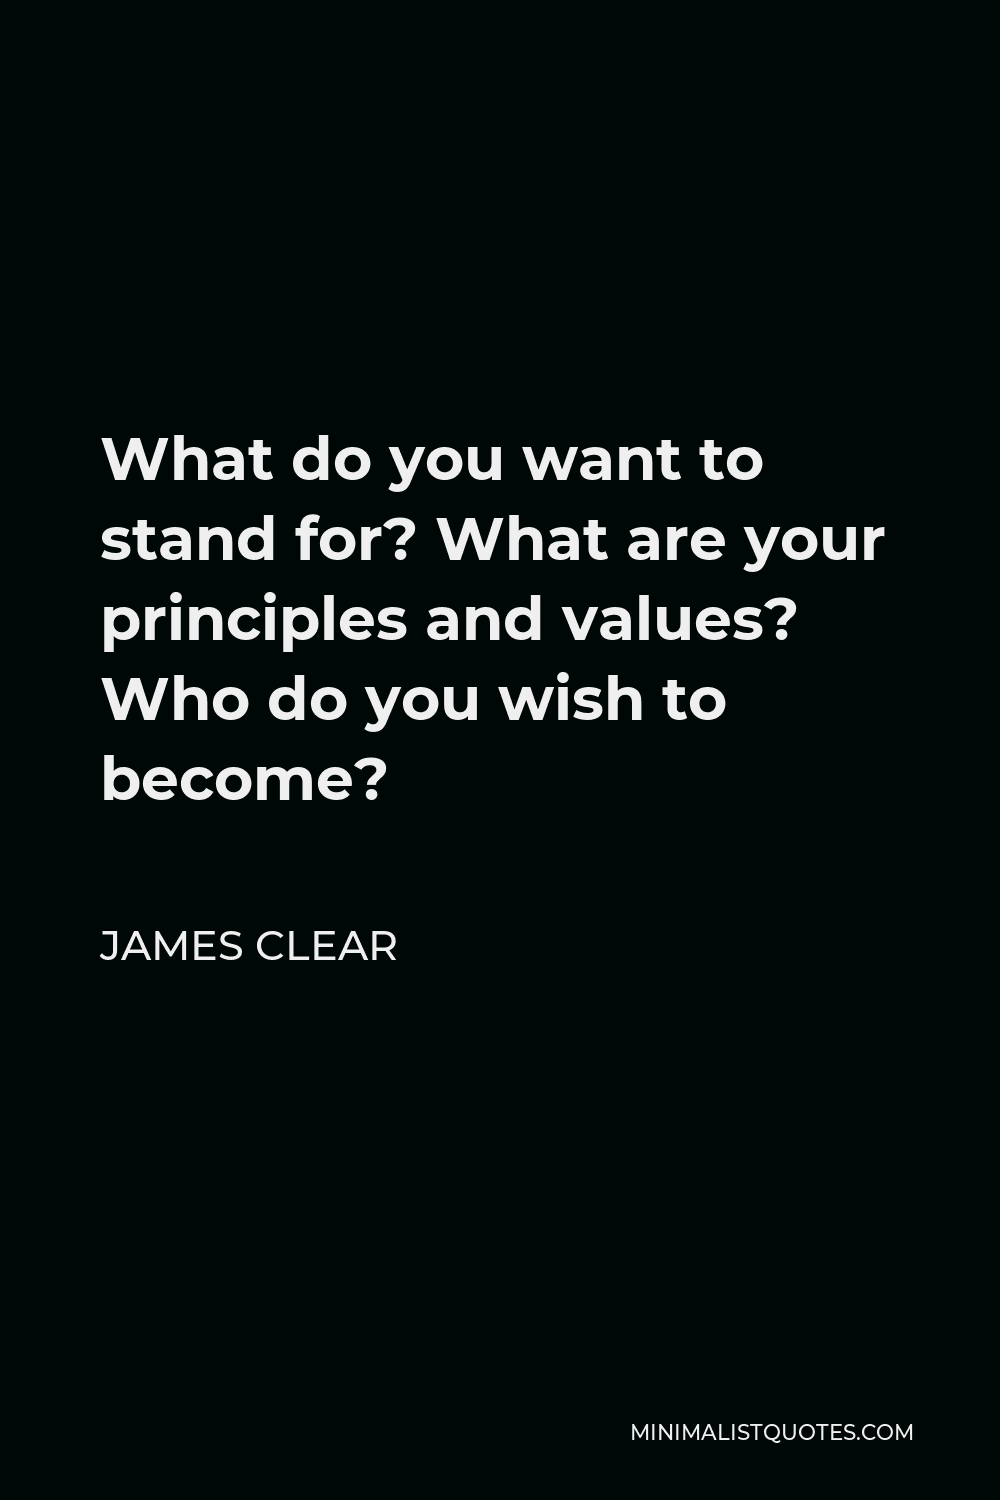 James Clear Quote - What do you want to stand for? What are your principles and values? Who do you wish to become?